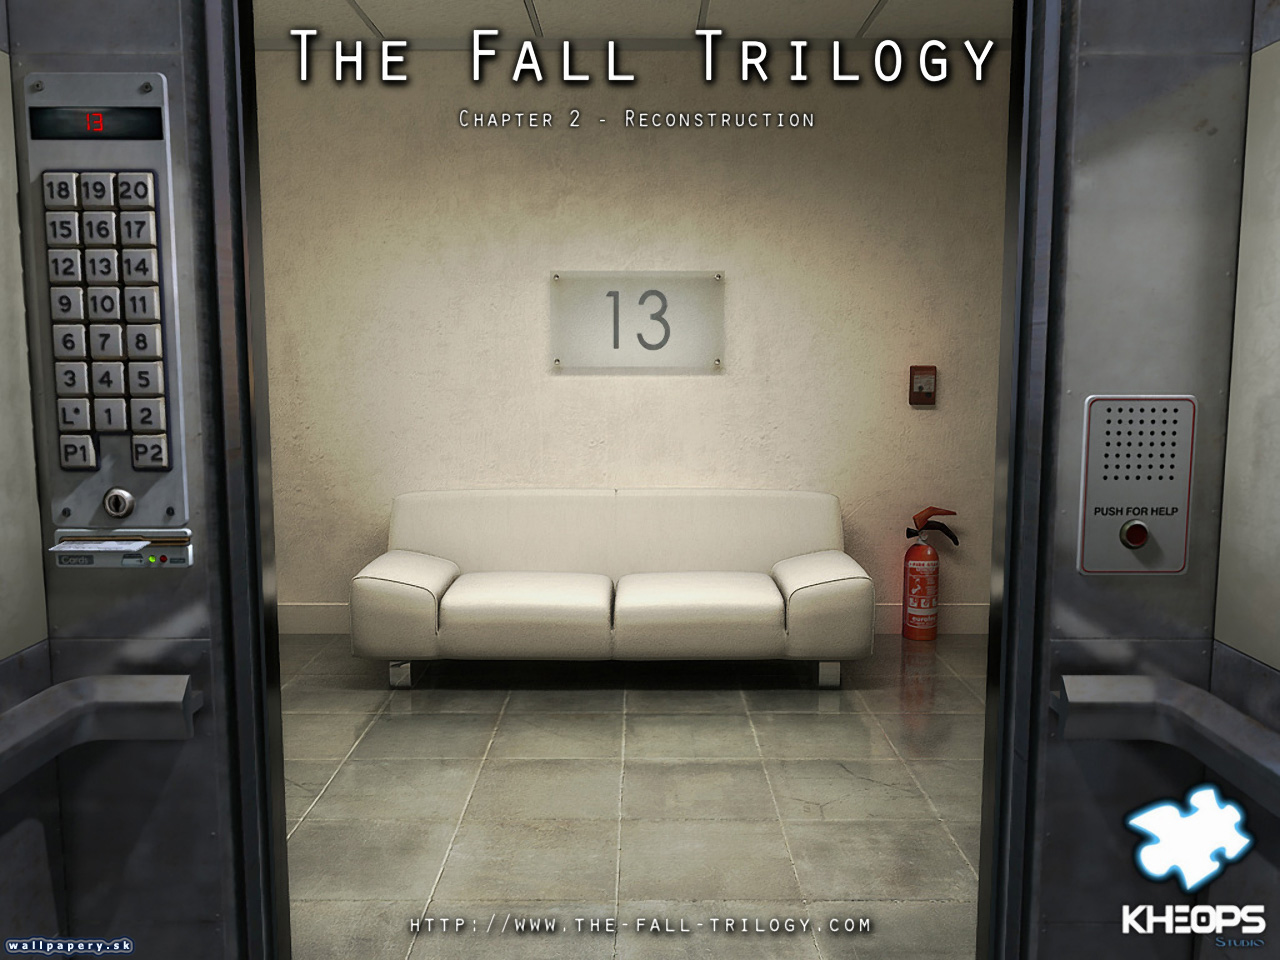 The Fall Trilogy - Chapter 2: Reconstruction - wallpaper 16